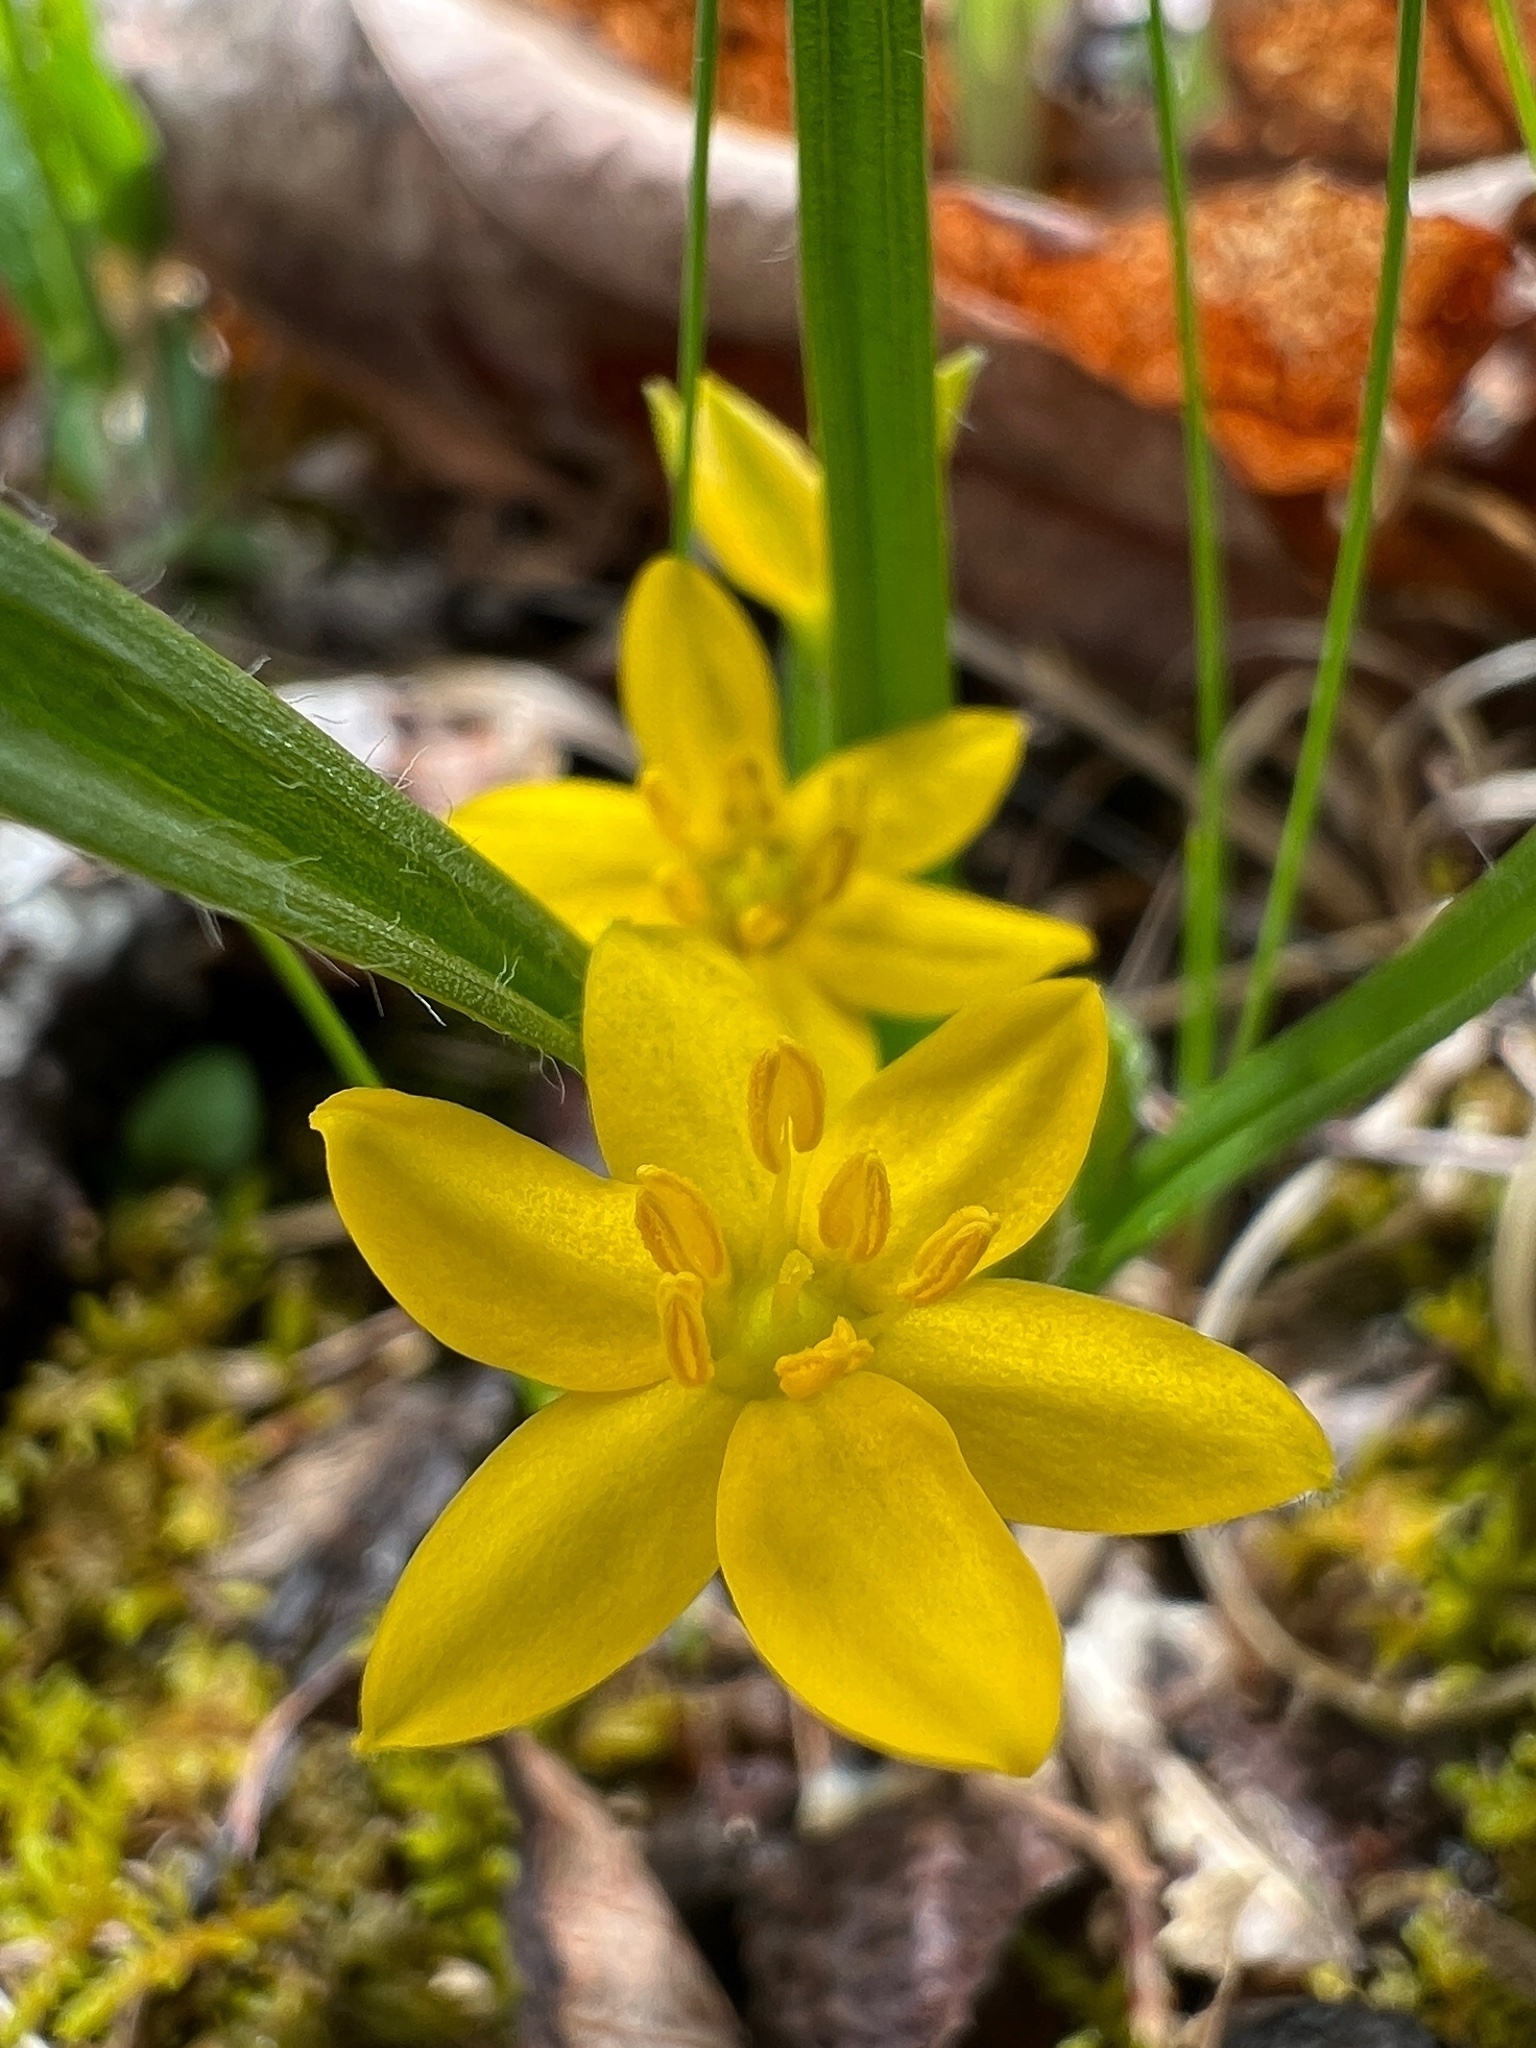 A macro image of a yellow, six petaled flower. The petals are pointed giving it a star shape.